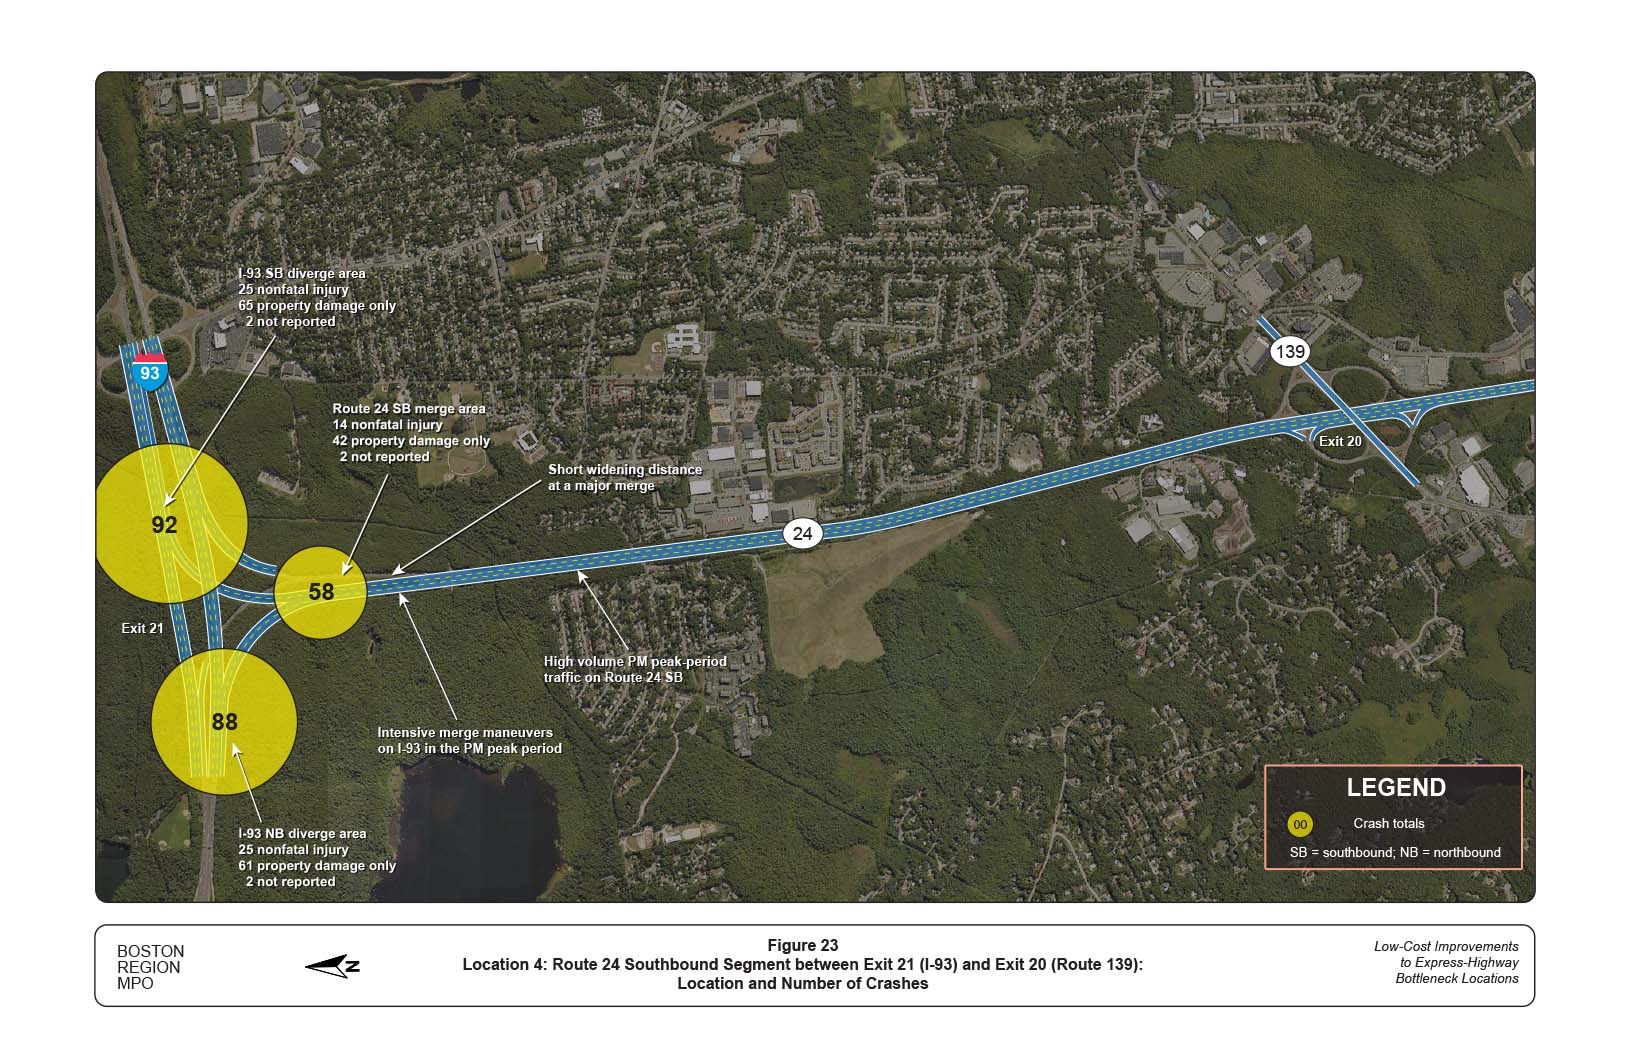 FIGURE 23. Location 4: Route 24 Southbound Segment between Exit 21 (I-93) and Exit 20 (Route 139): Location and Number of Crashes
Figure 23 shows the location and number of crashes that occurred on the Route 24 southbound segment between Exit 21 and Exit 20. Crashes were very high at all three locations studied. The figure shows that both exits registered almost 100 crashes each.
